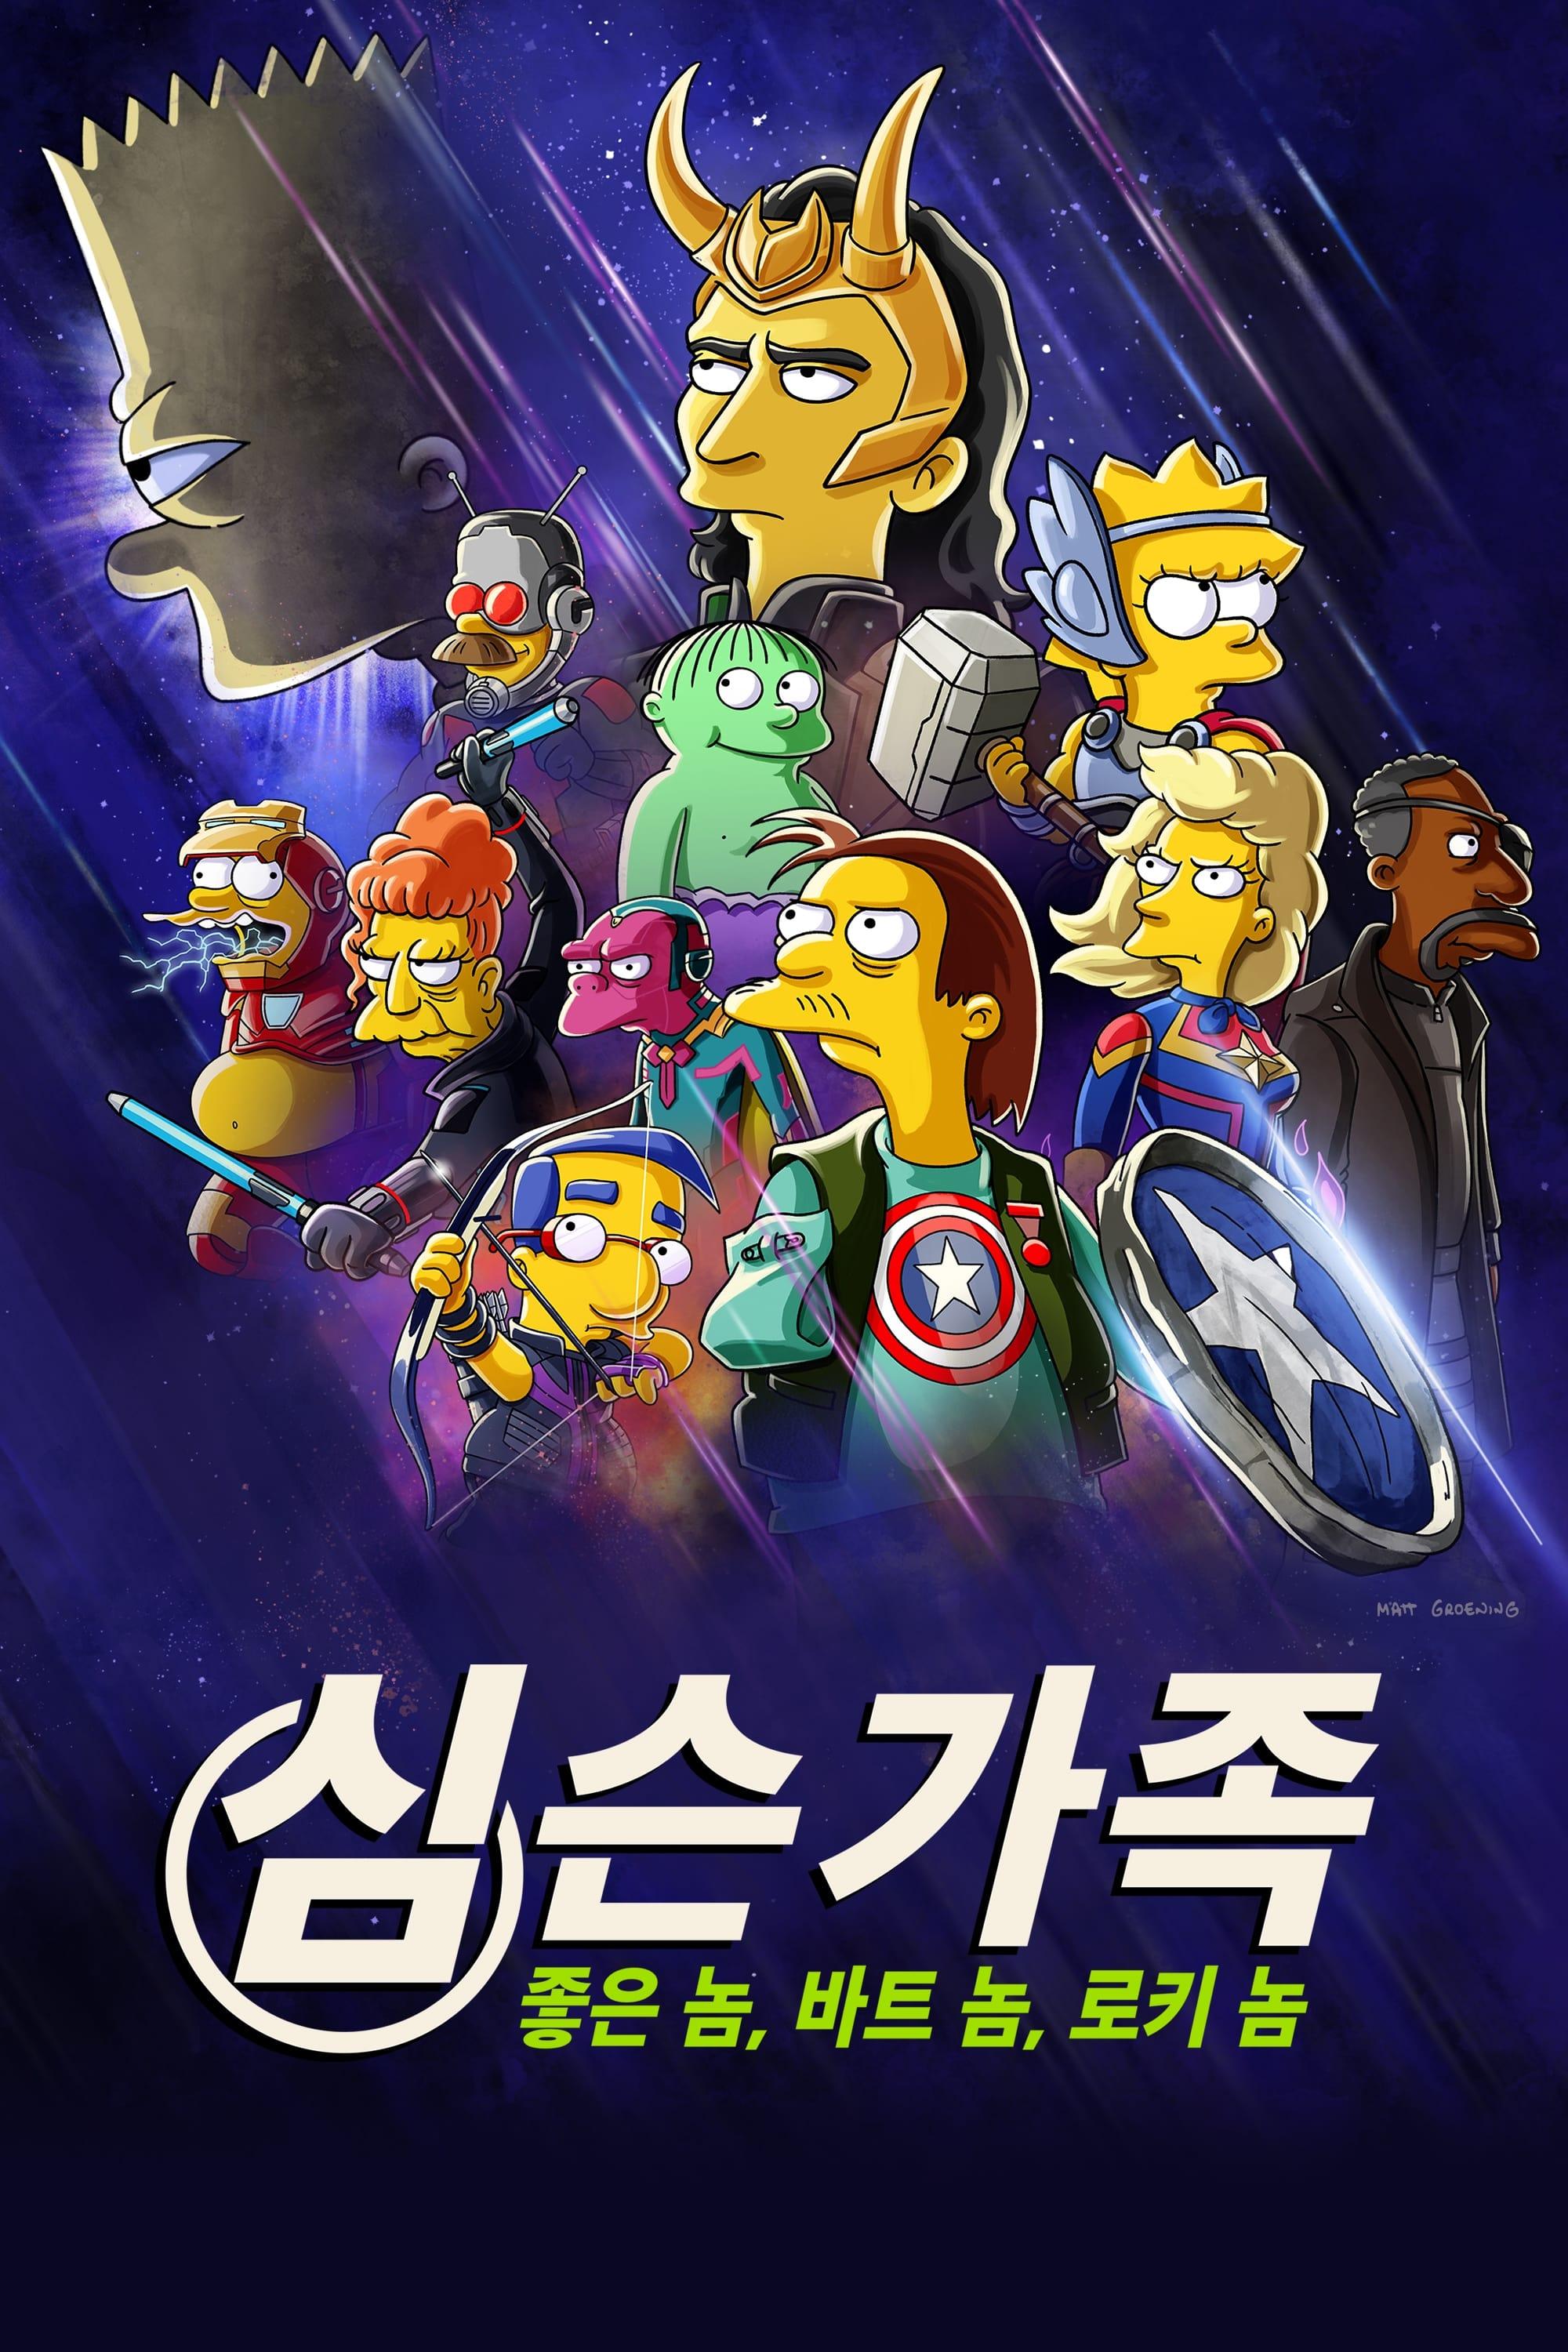 The Simpsons: The Good, the Bart, and the Loki poster